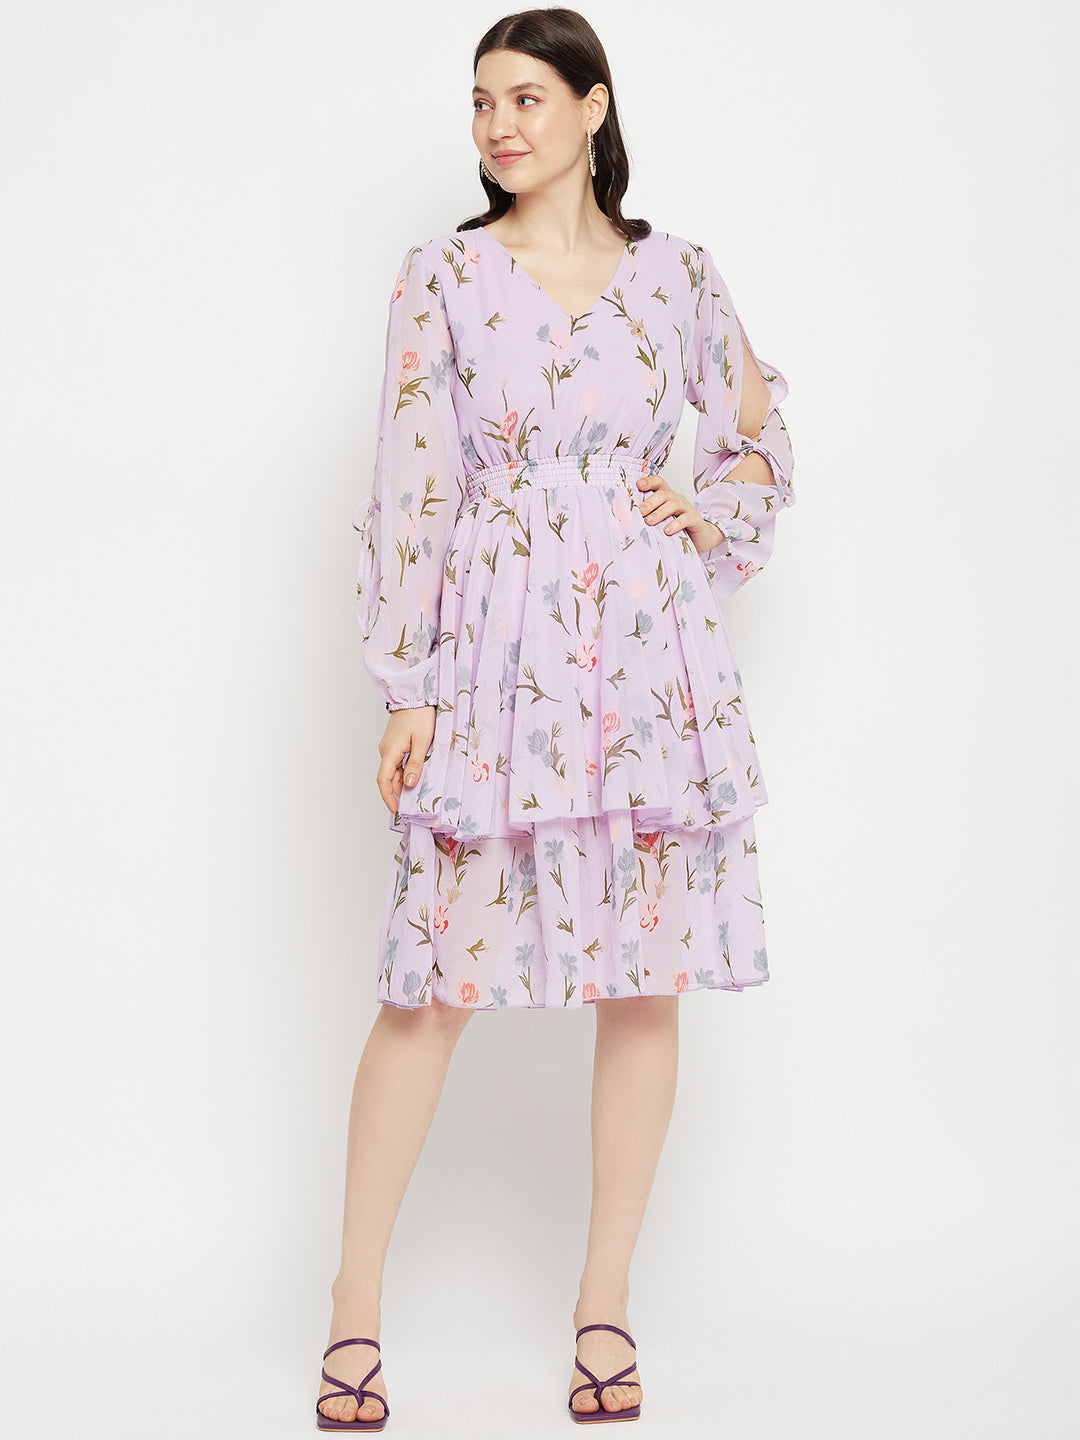 Daydream Floral Gown | Teuta Matoshi